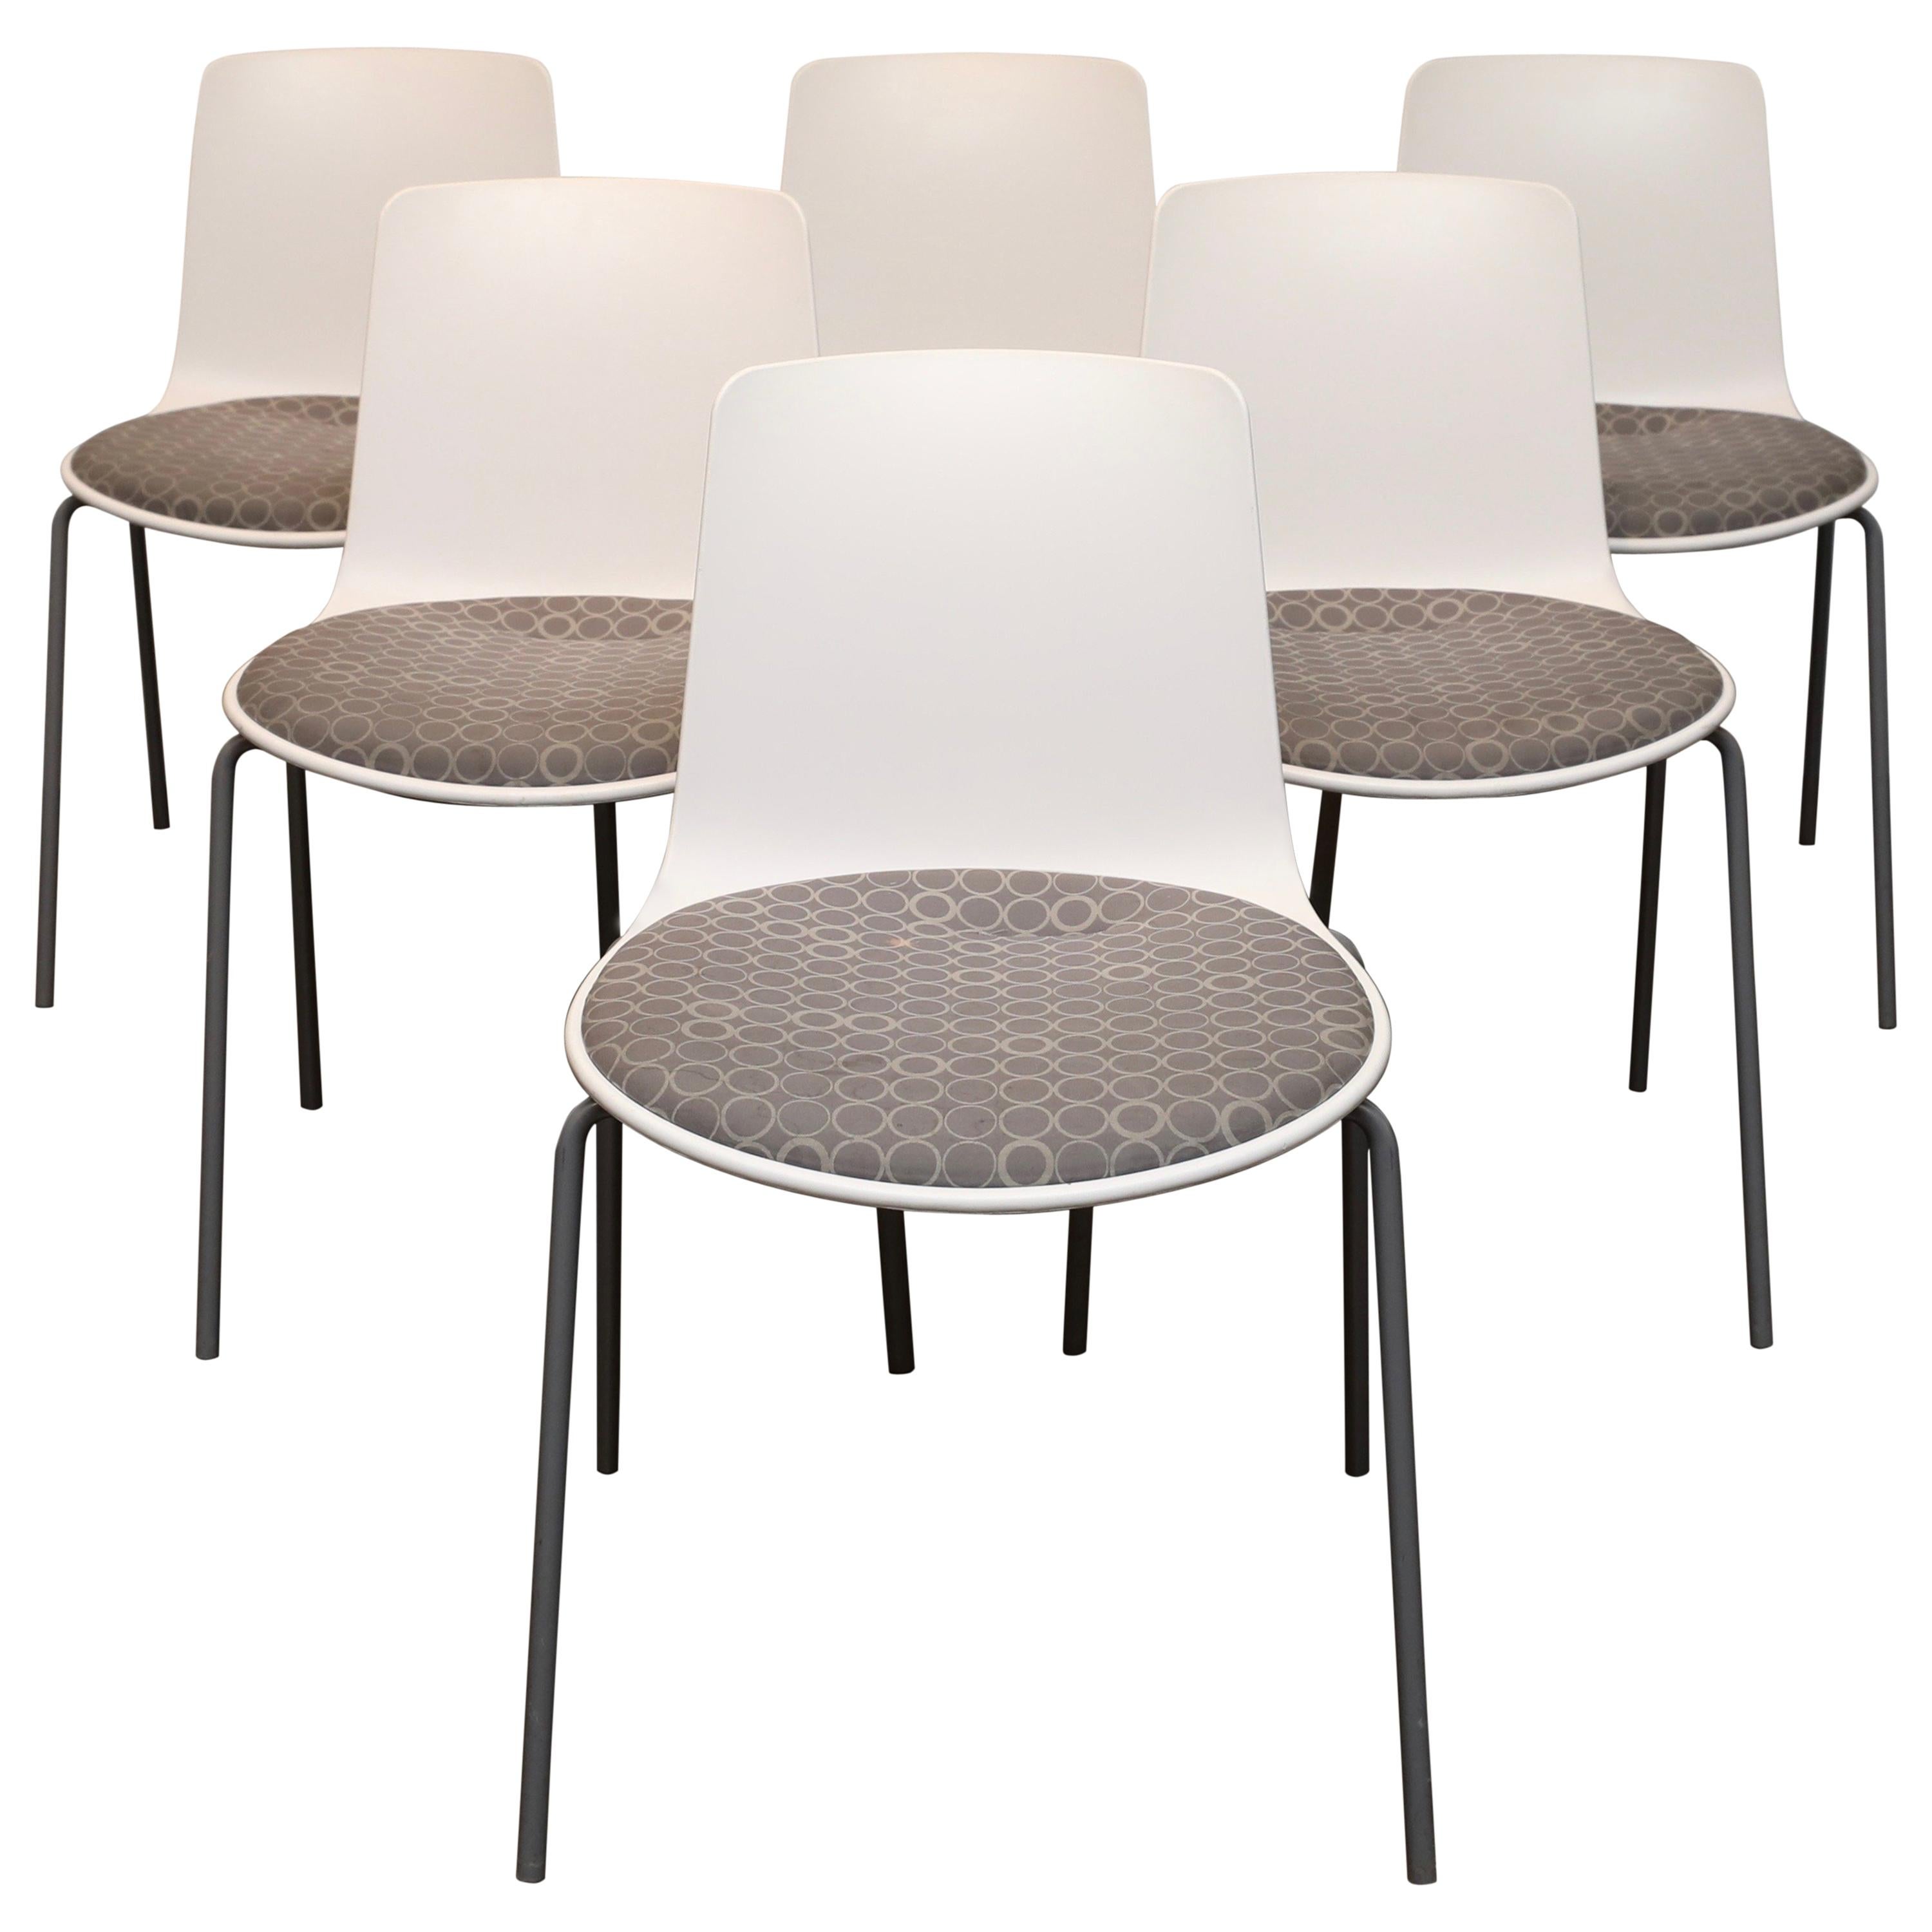 Set of Six Enea Lotus Chairs by Coalesse